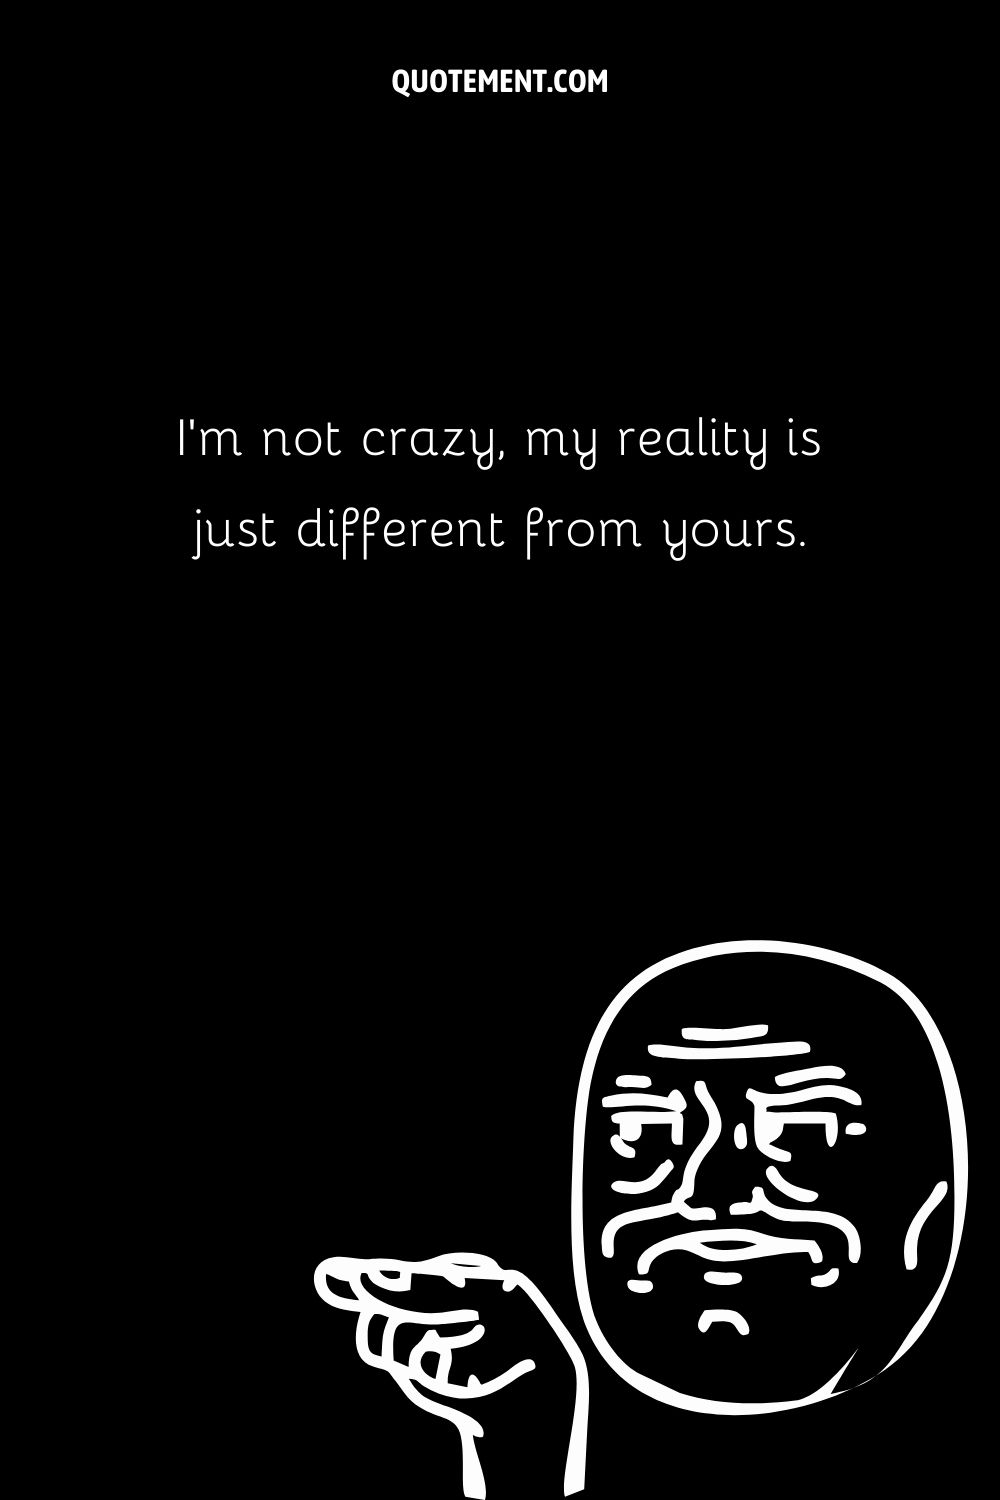 I’m not crazy, my reality is just different from yours.